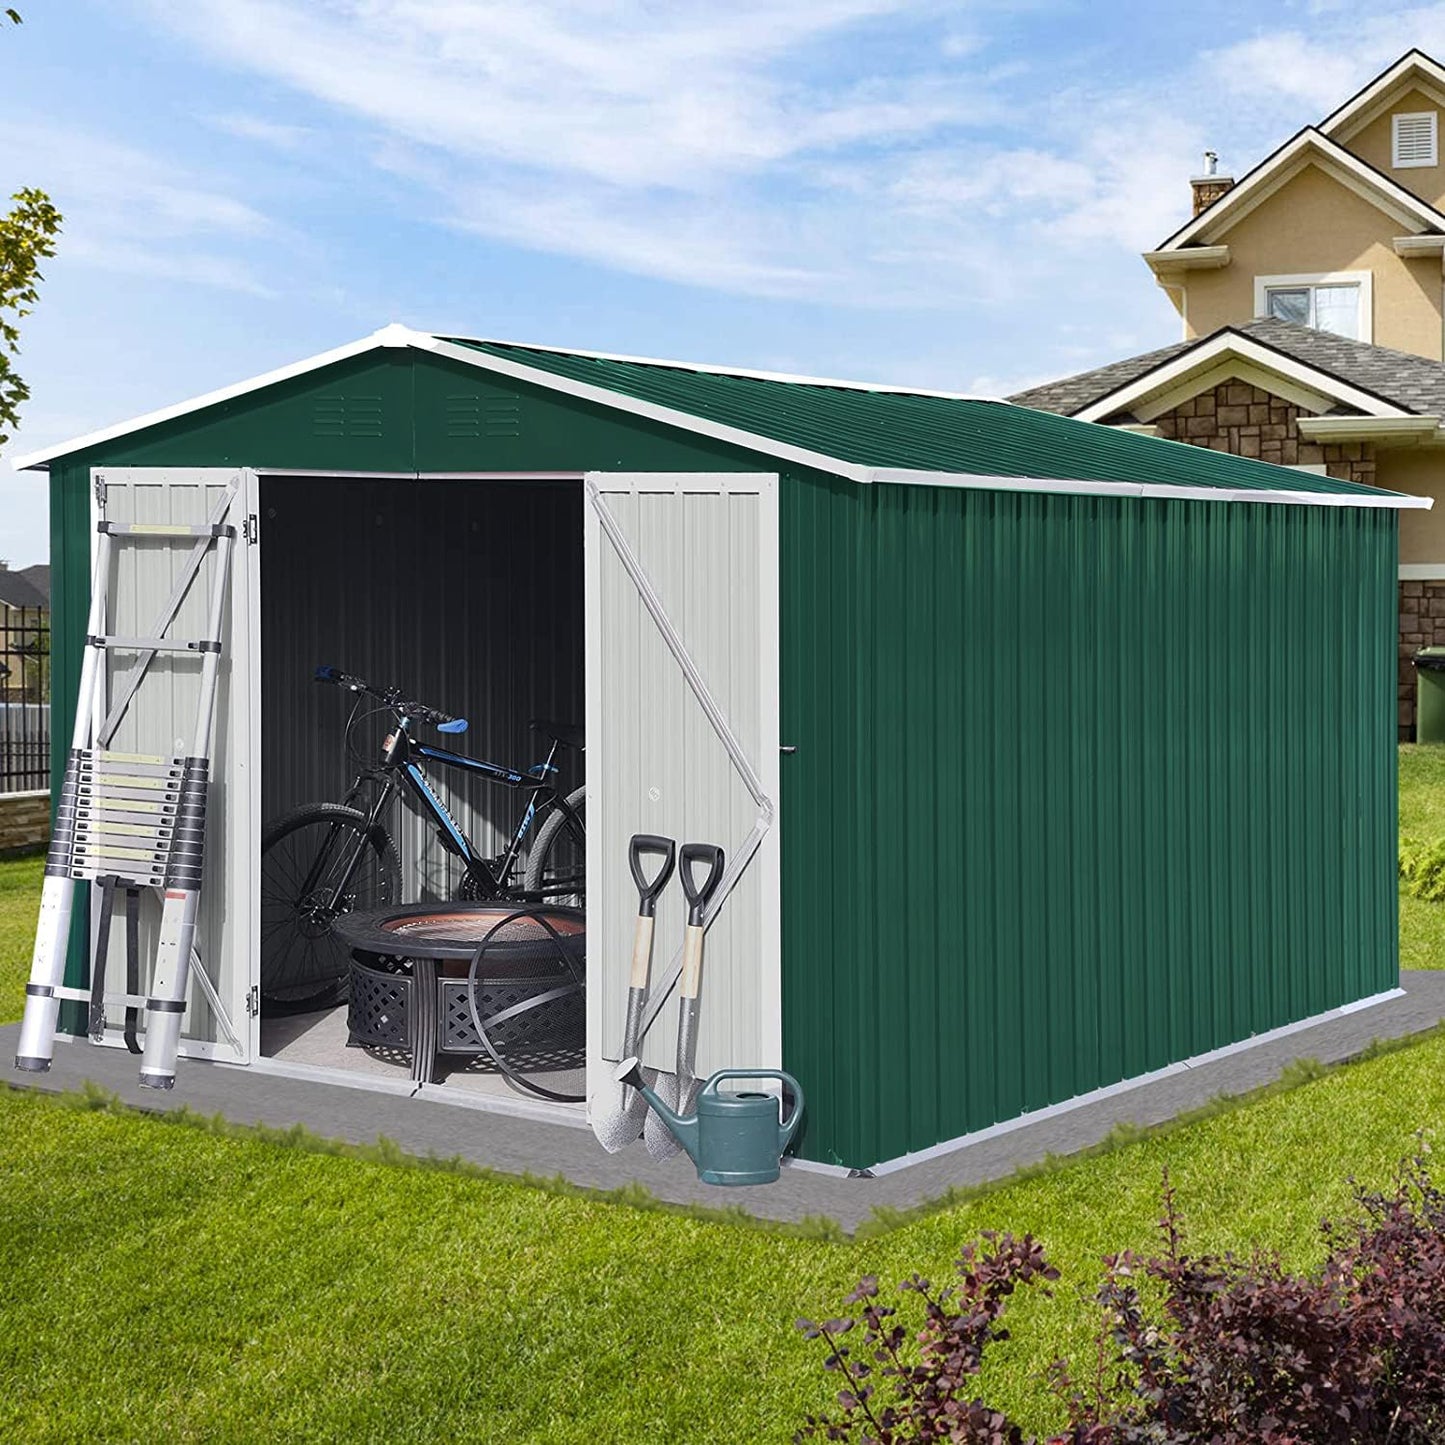 EMKK 8' x 6' Outdoor Storage Shed with Double Lockable Doors, Anti-Corrosion Metal Garden Shed with Base Frame, Waterproof Shed Outdoor Storage Clearance for Backyard Patio Lawn C-Green 8 x 6 FT Storage Sheds